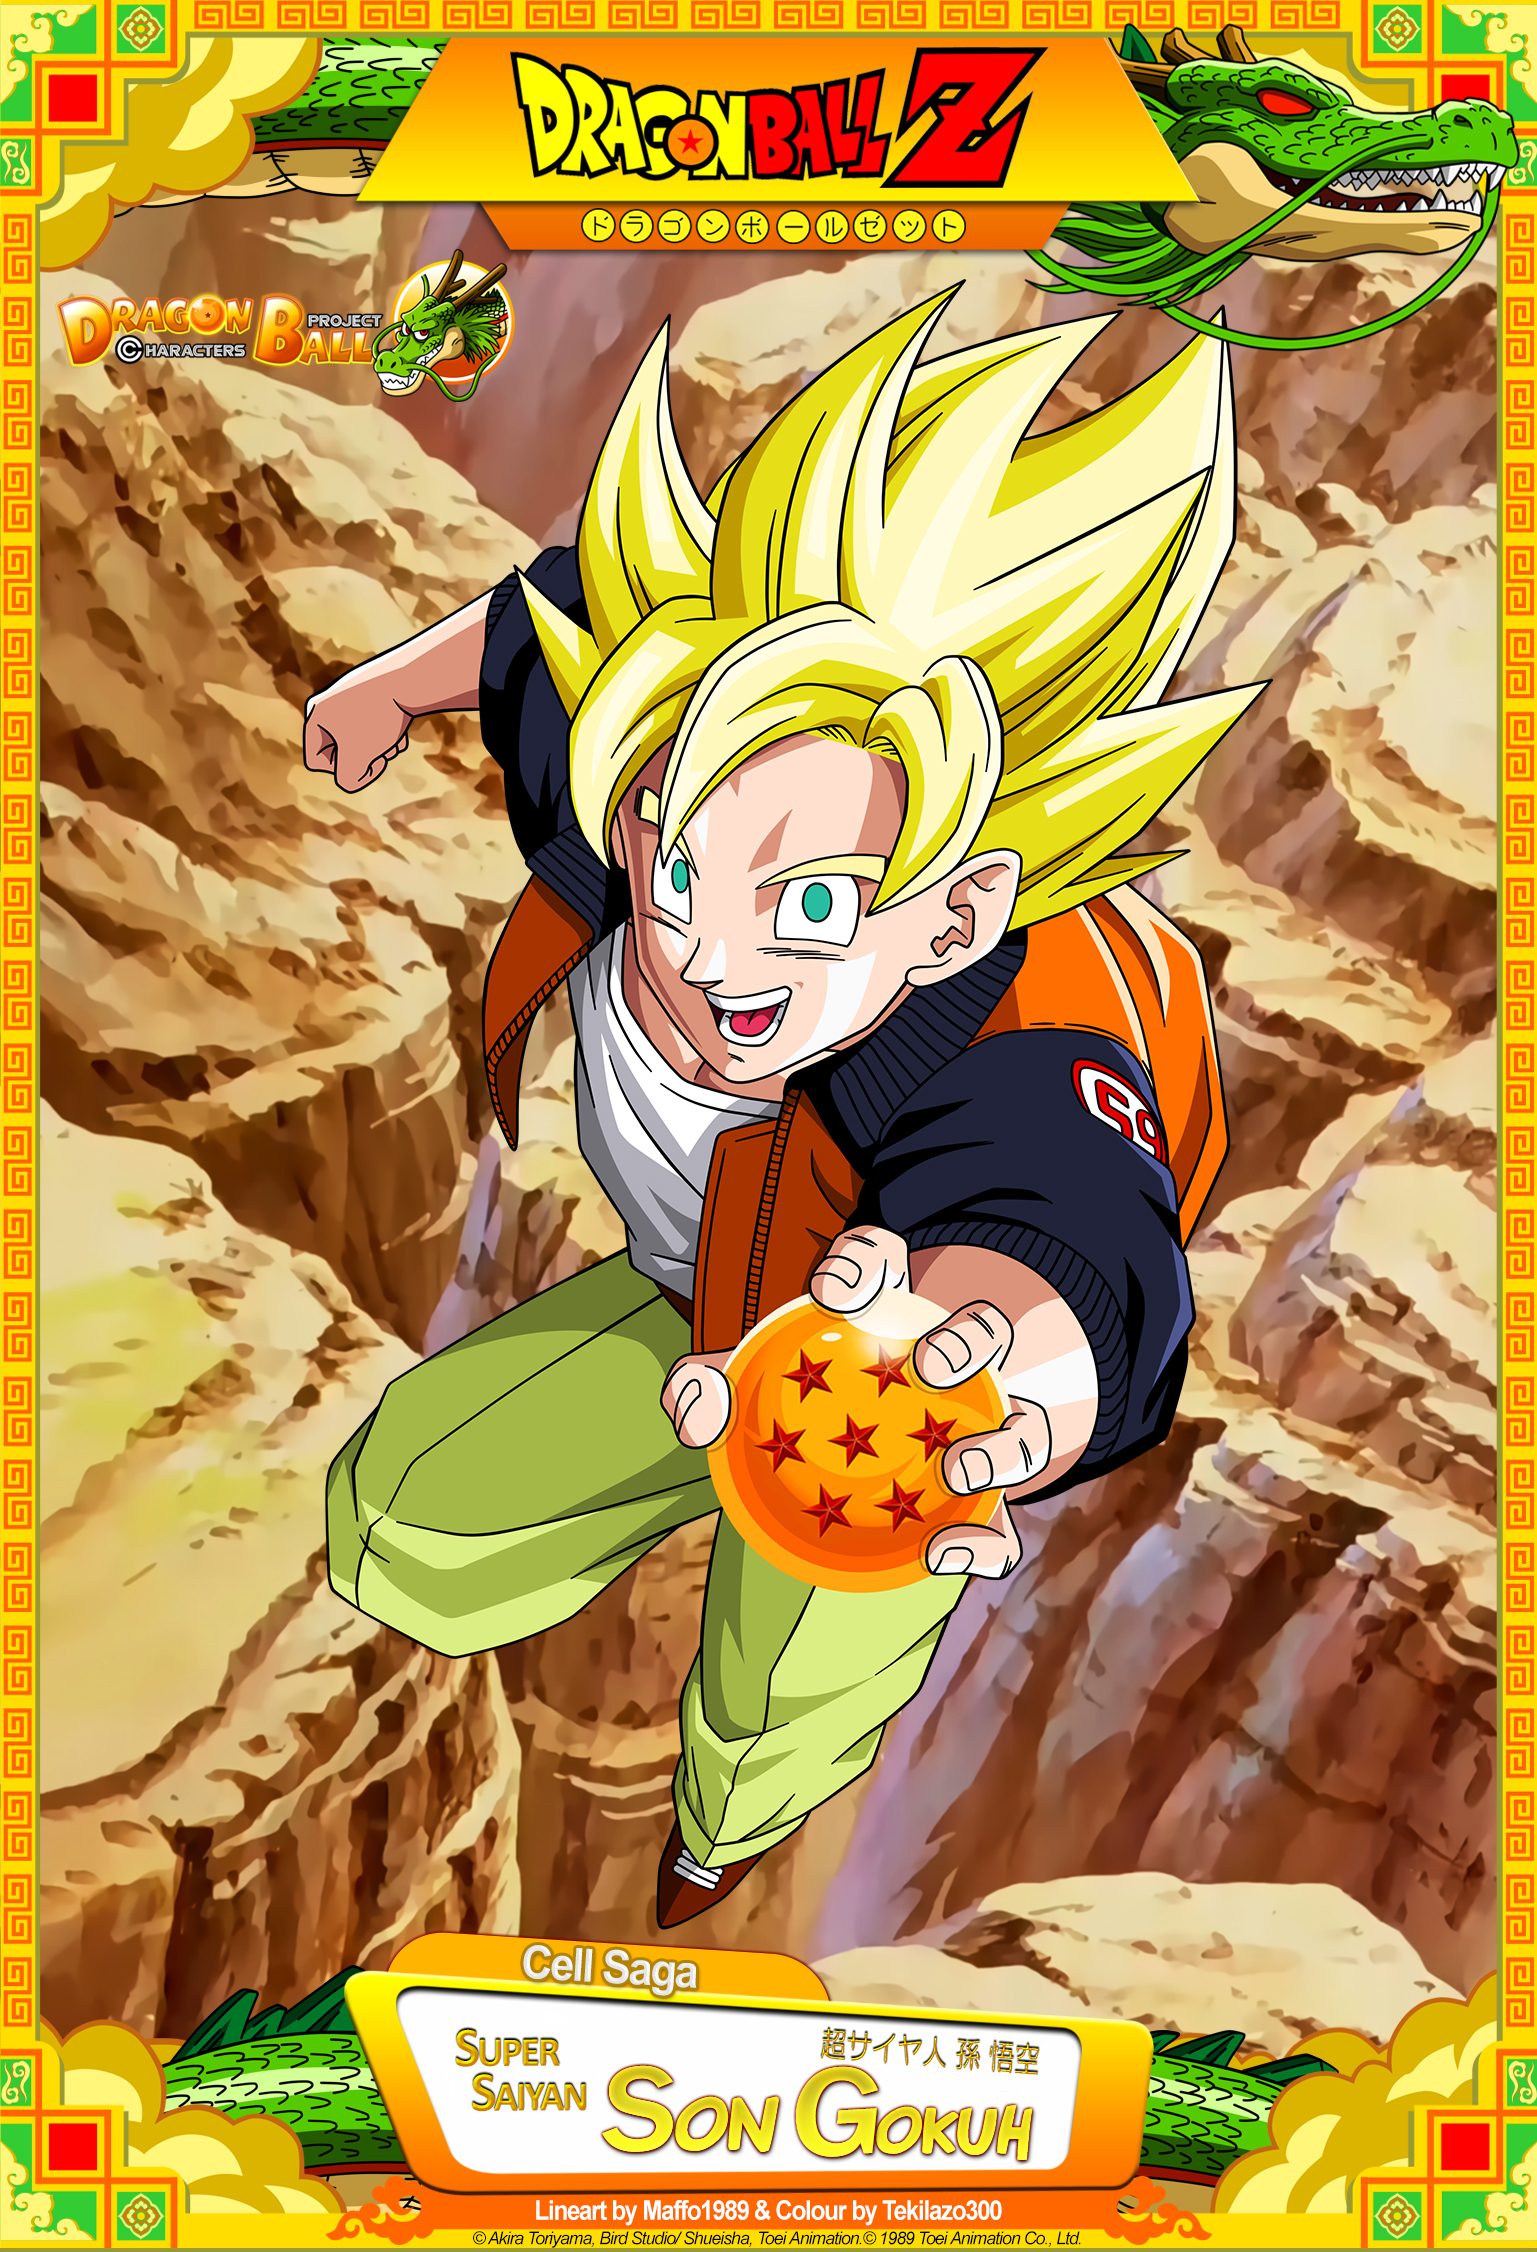 Dragon Ball Z - Android 20 by DBCProject on DeviantArt